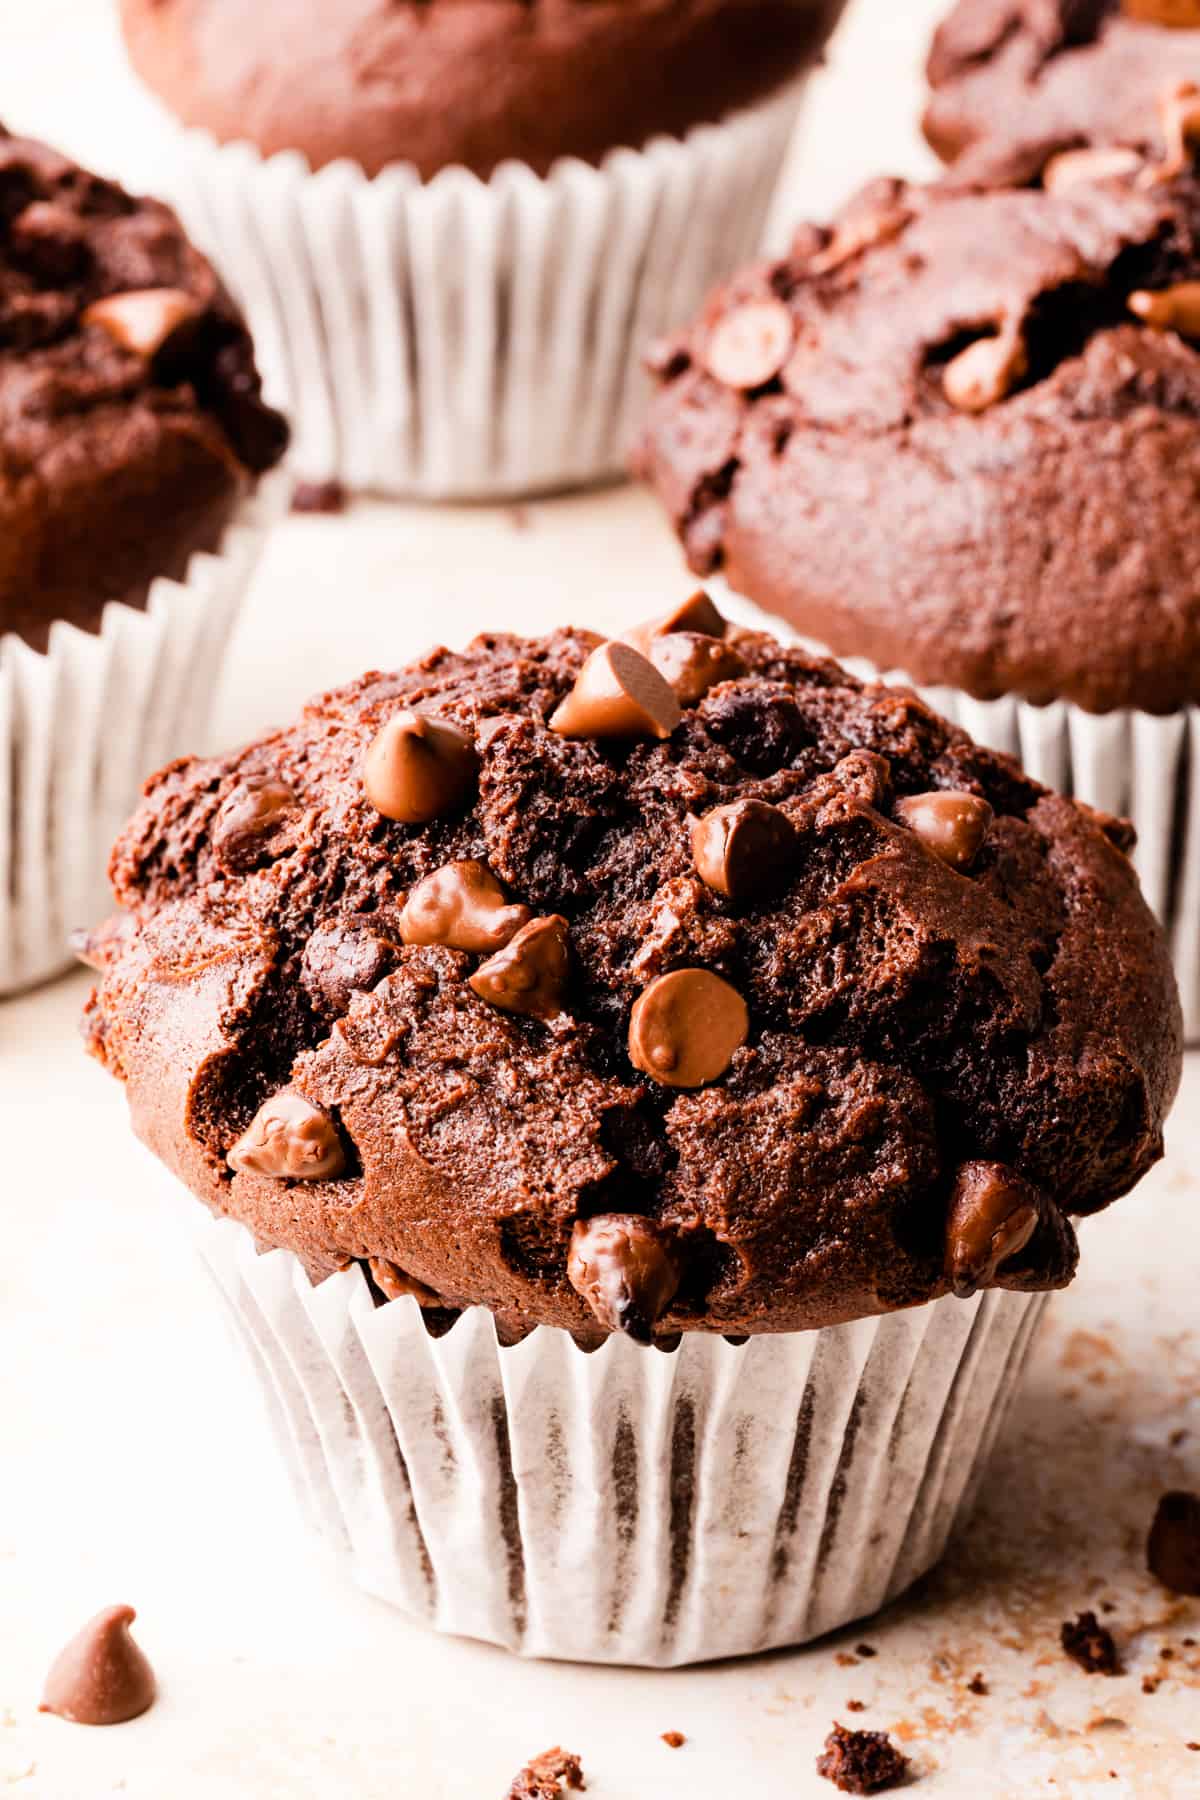 muffin with chocolate and chocolate chips topping.